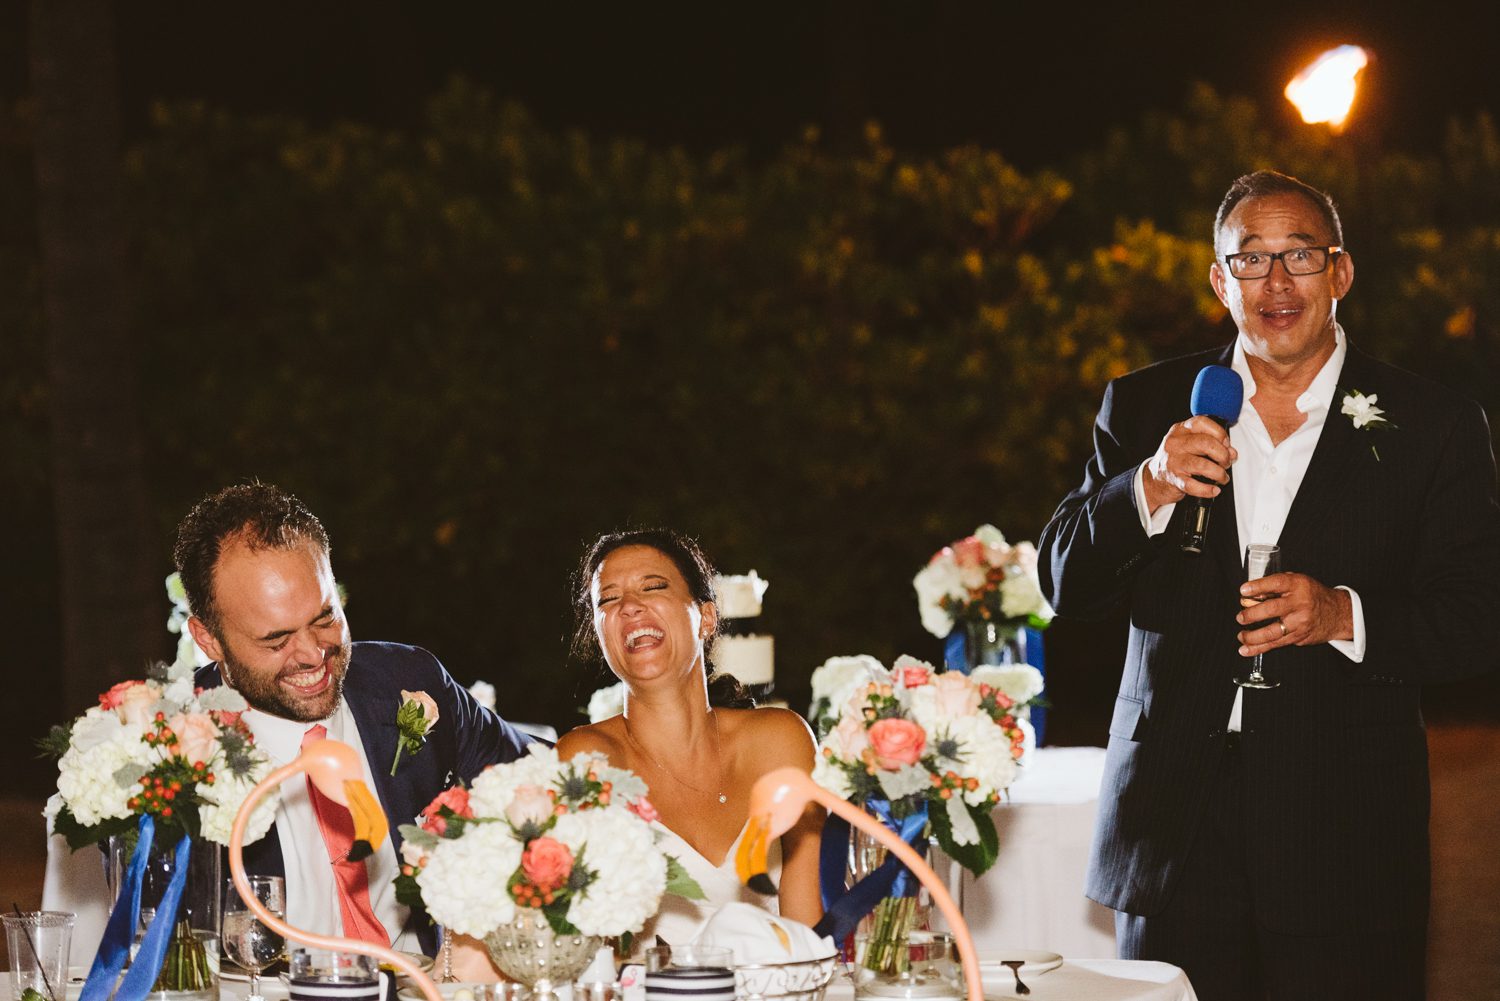 A Florida Keys wedding reception at the Postcard Inn with a bride and groom in fits of laughter.